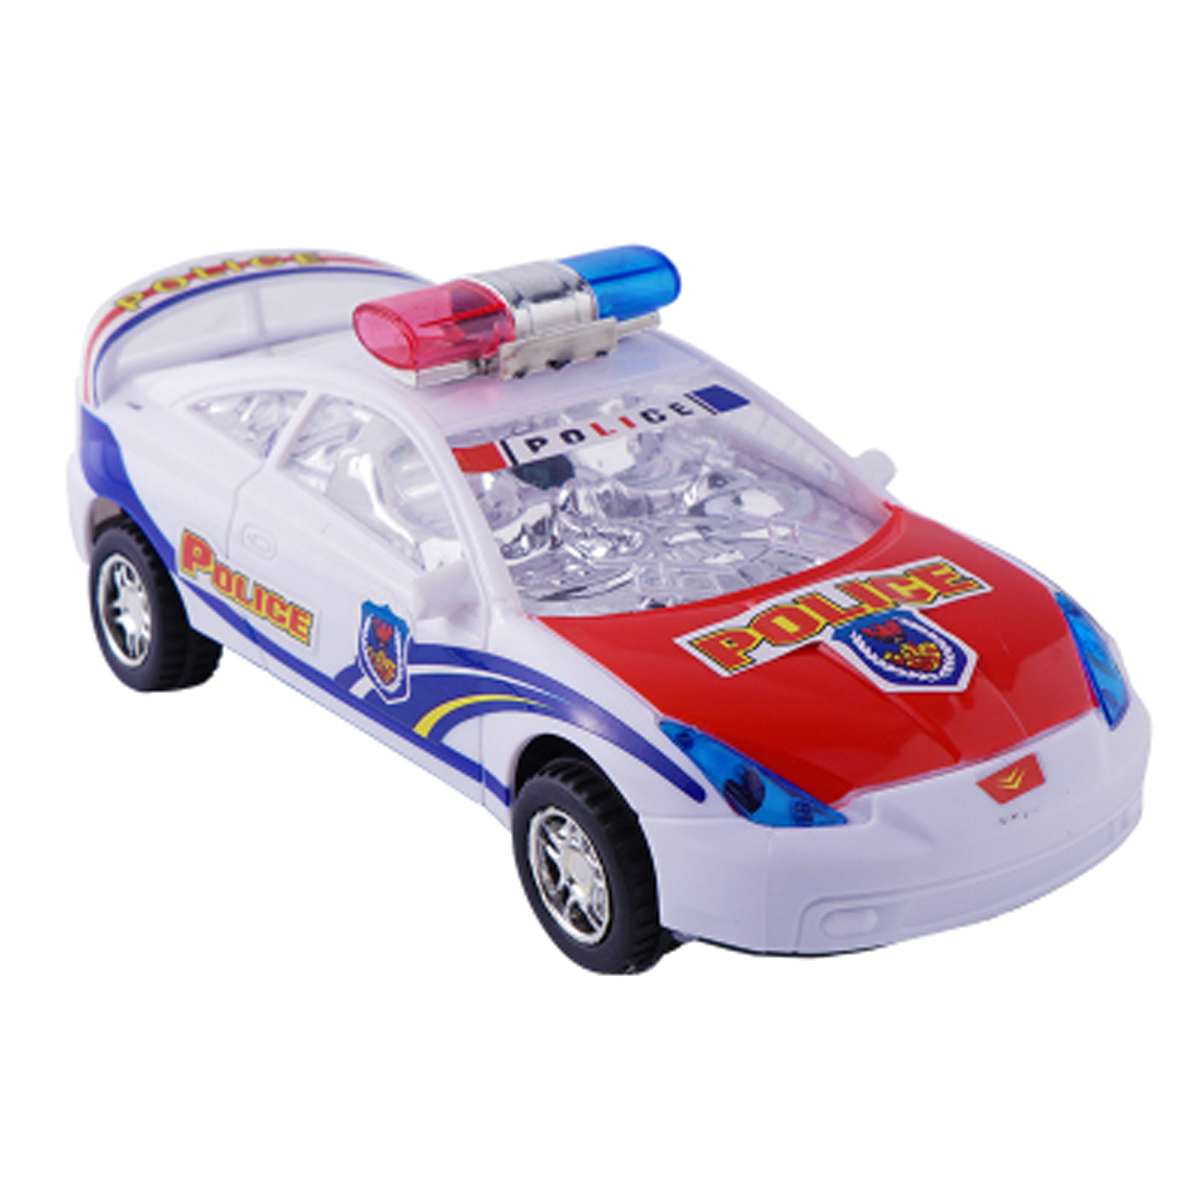 Childrens-Electric-Alloy-Simulation-Po-lice-Car-Diecast-Model-Toy-with-LED-Light-and-Music-1604579-6